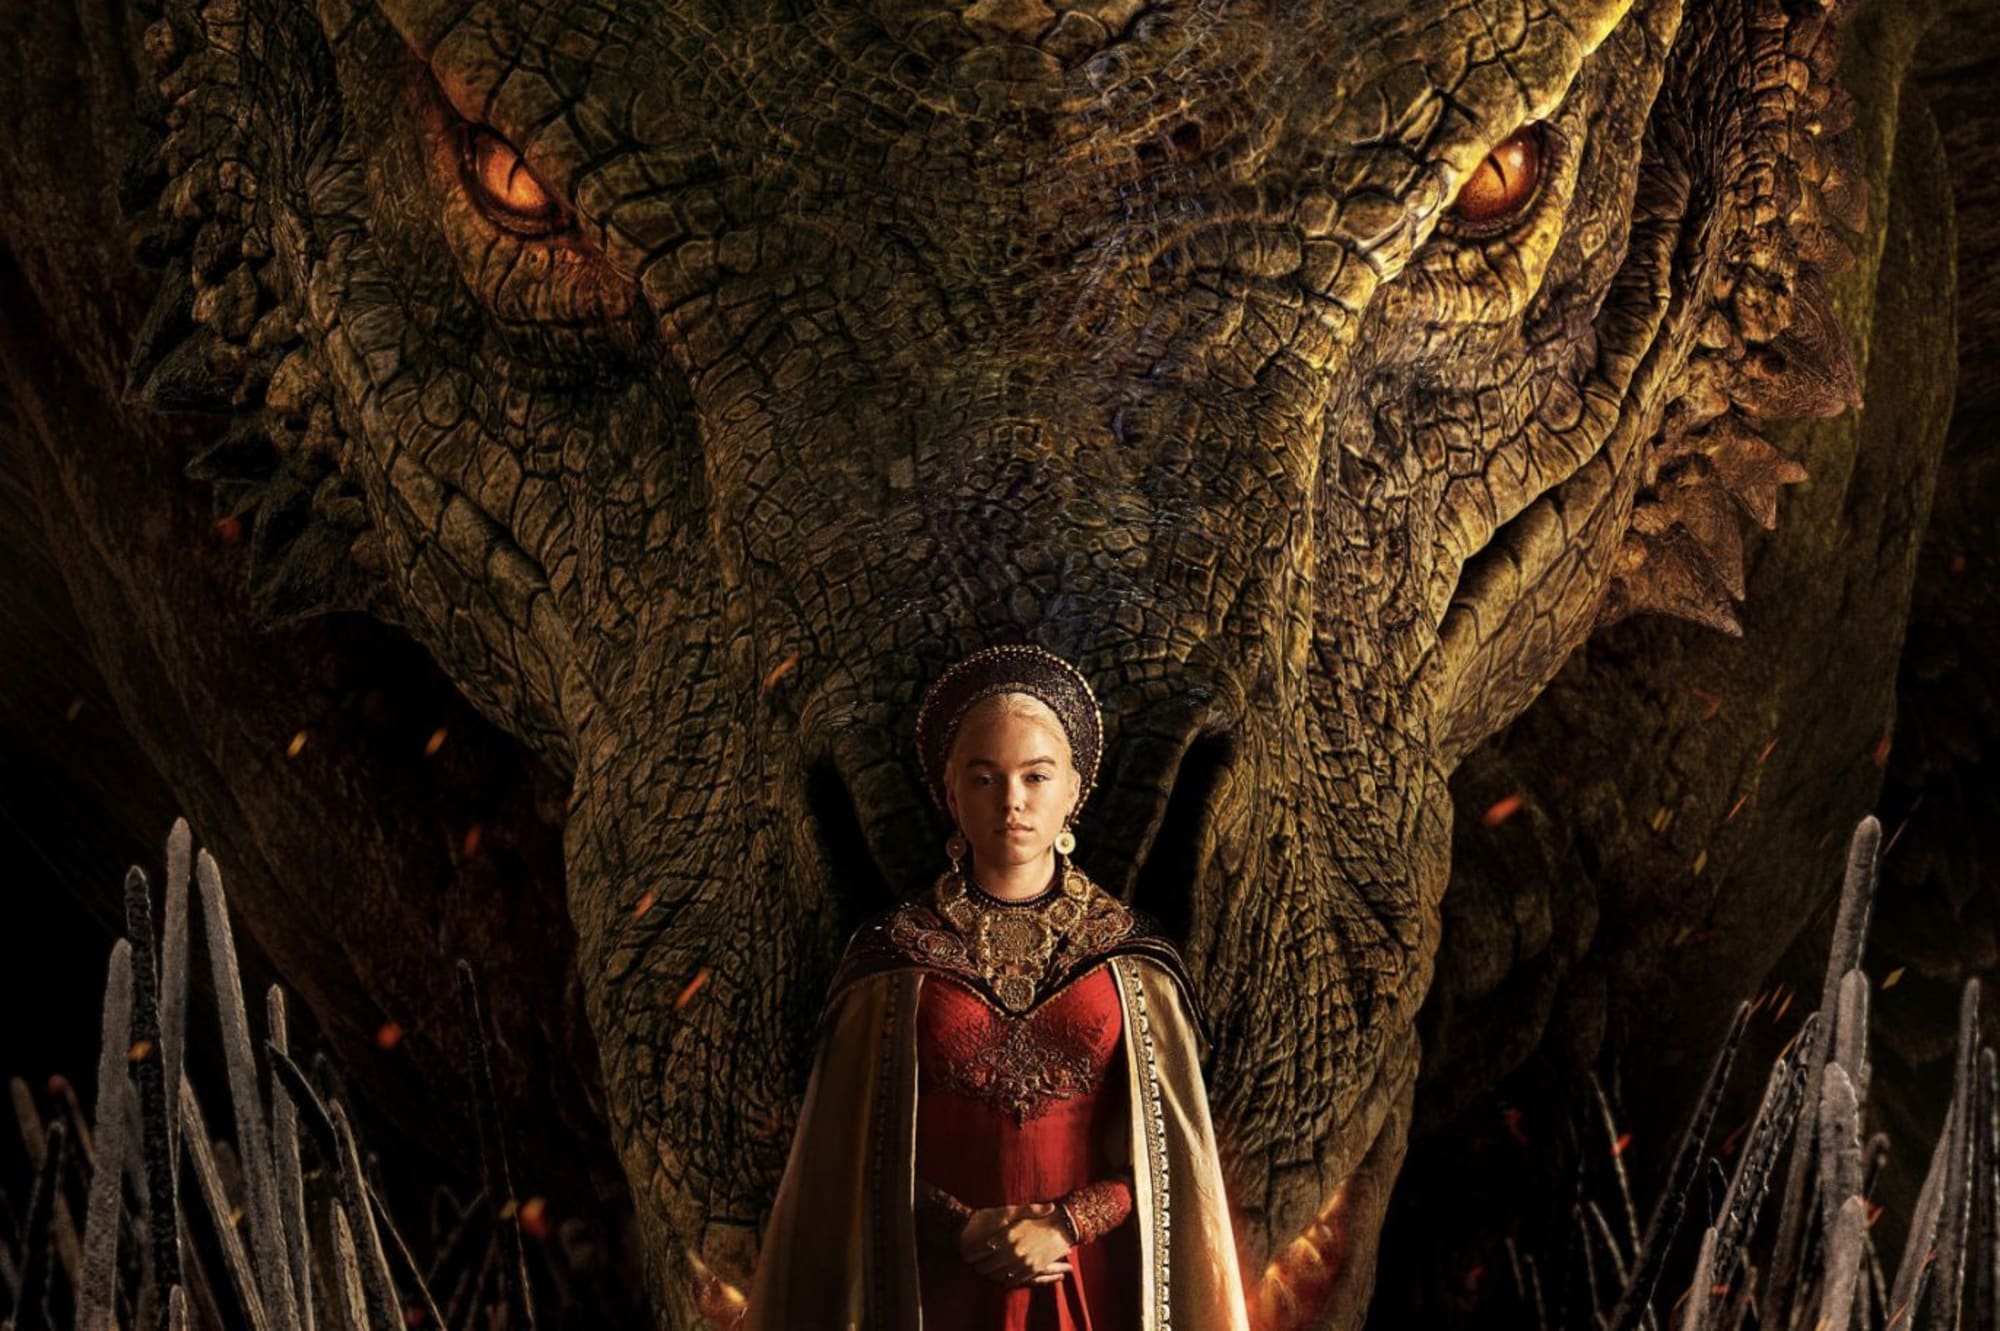 House of the Dragon: Release date, trailer, cast, plot